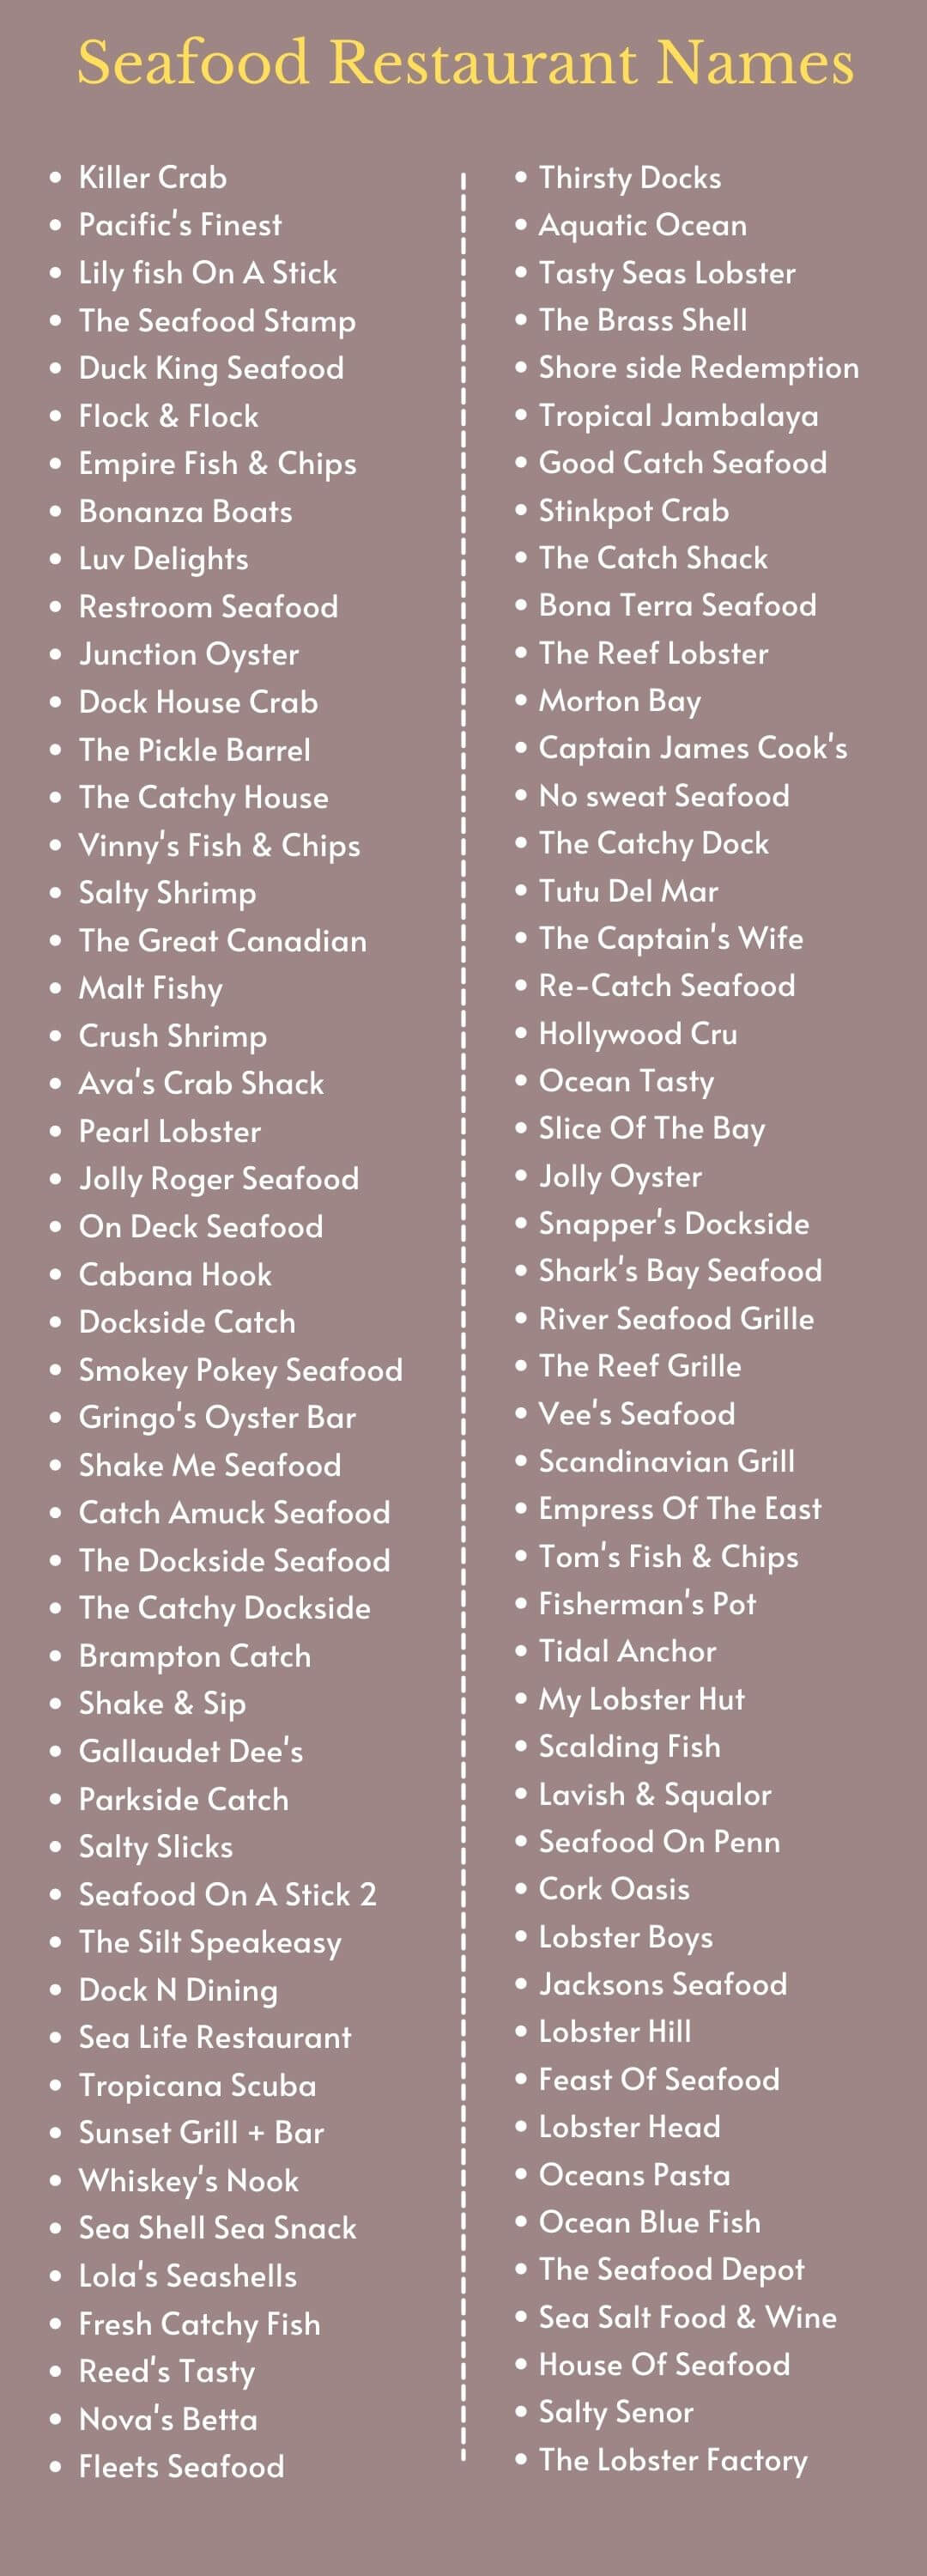 Seafood Restaurant Names: Infographic